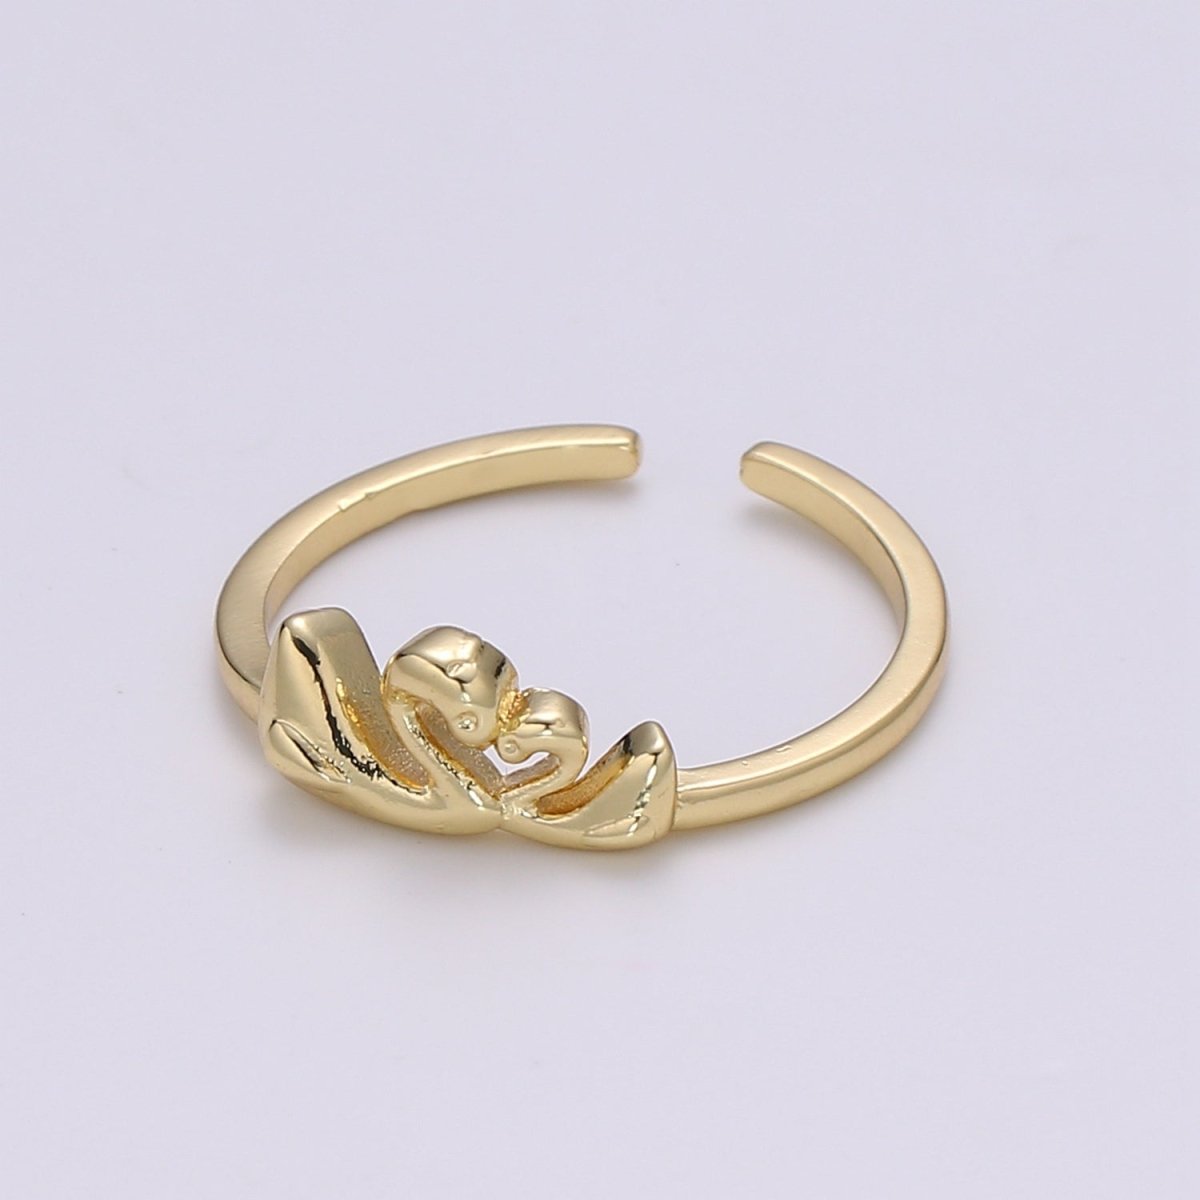 Gold Band Love Forever Swan ring, Delicate Promise Ring adjustable open Ring Dainty Twin swan Ring Minimalist Jewelry - DLUXCA